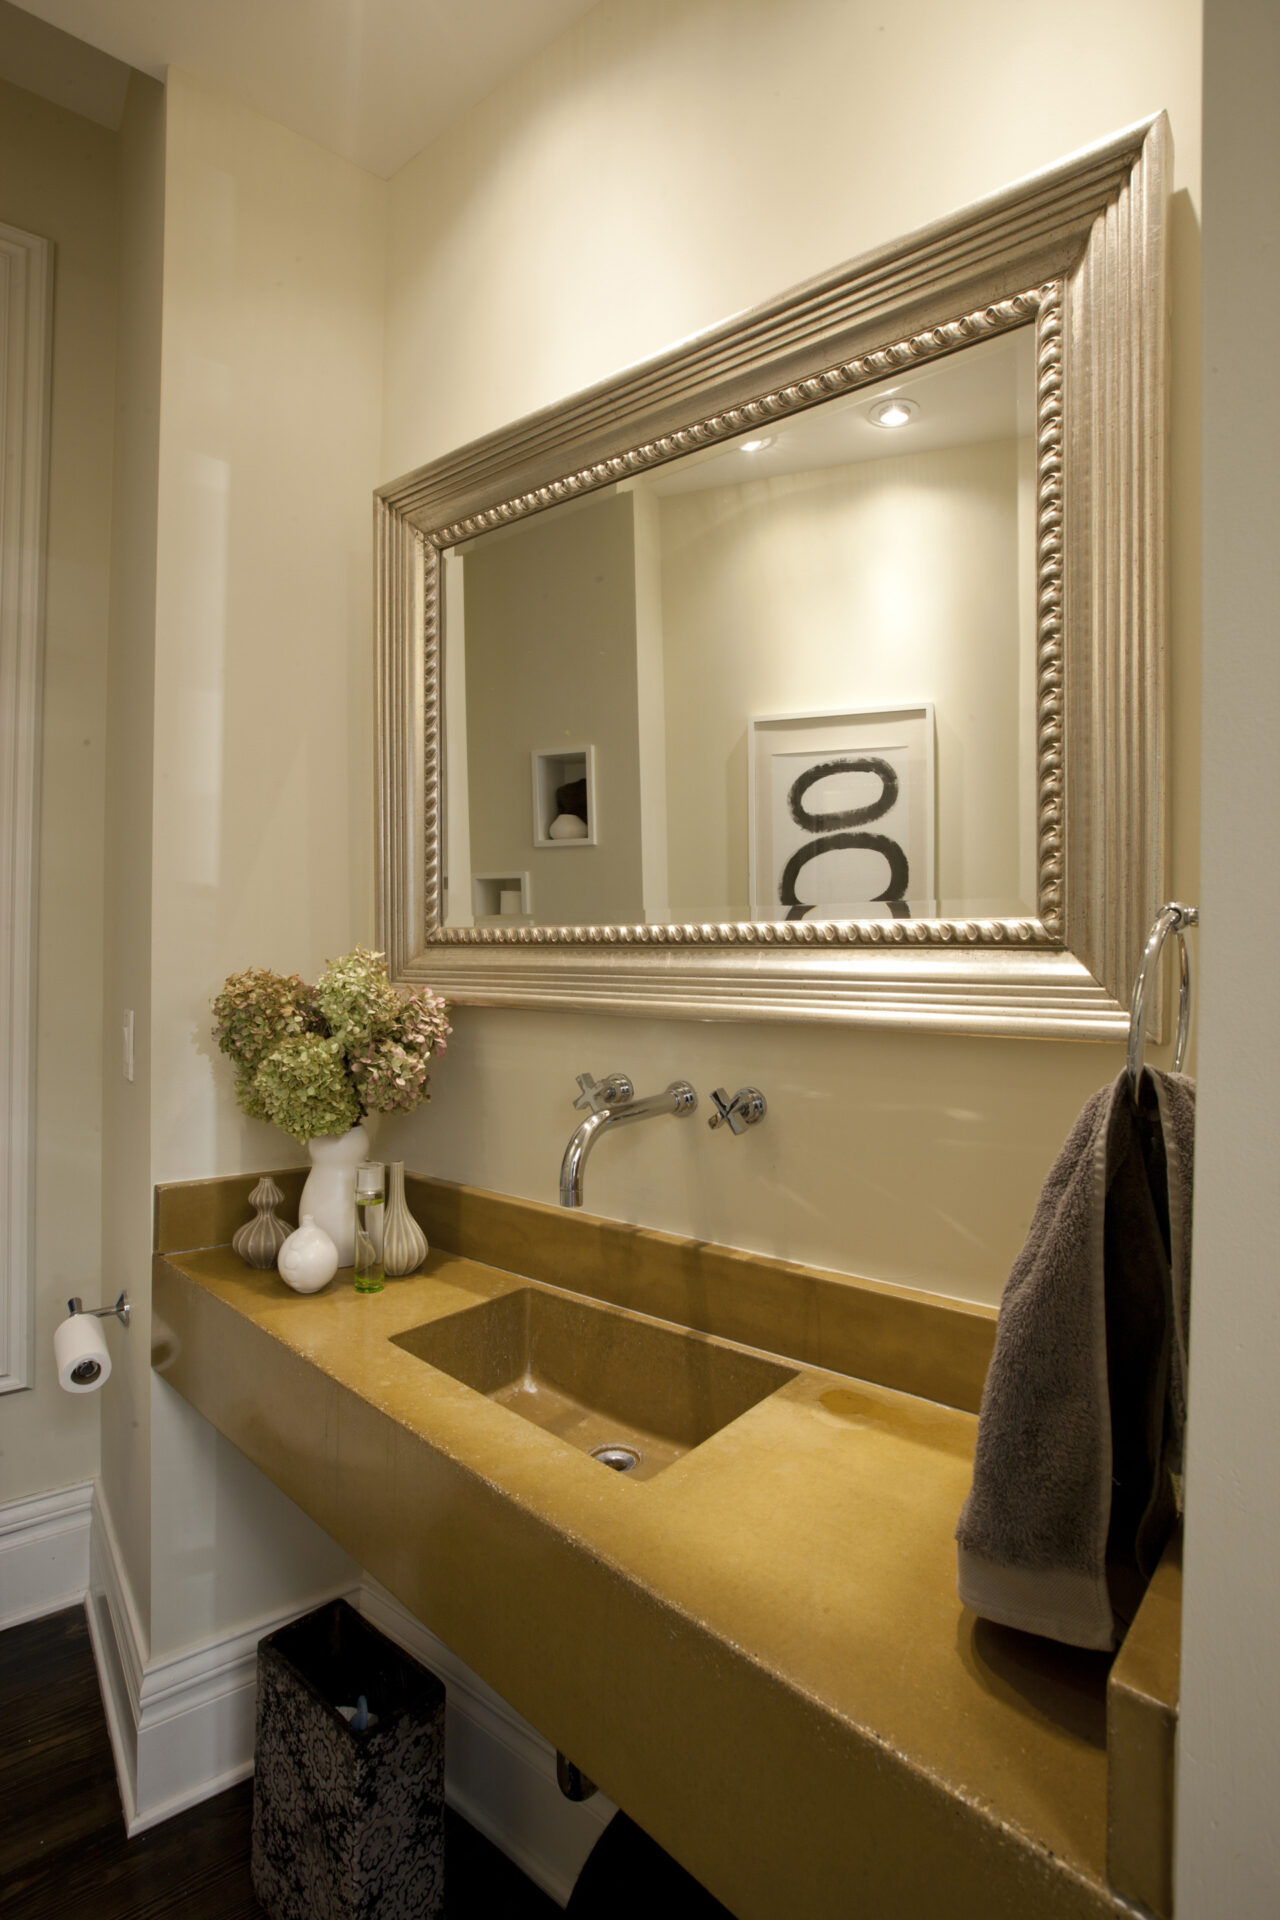 elegant sink and countertop with framed mirror